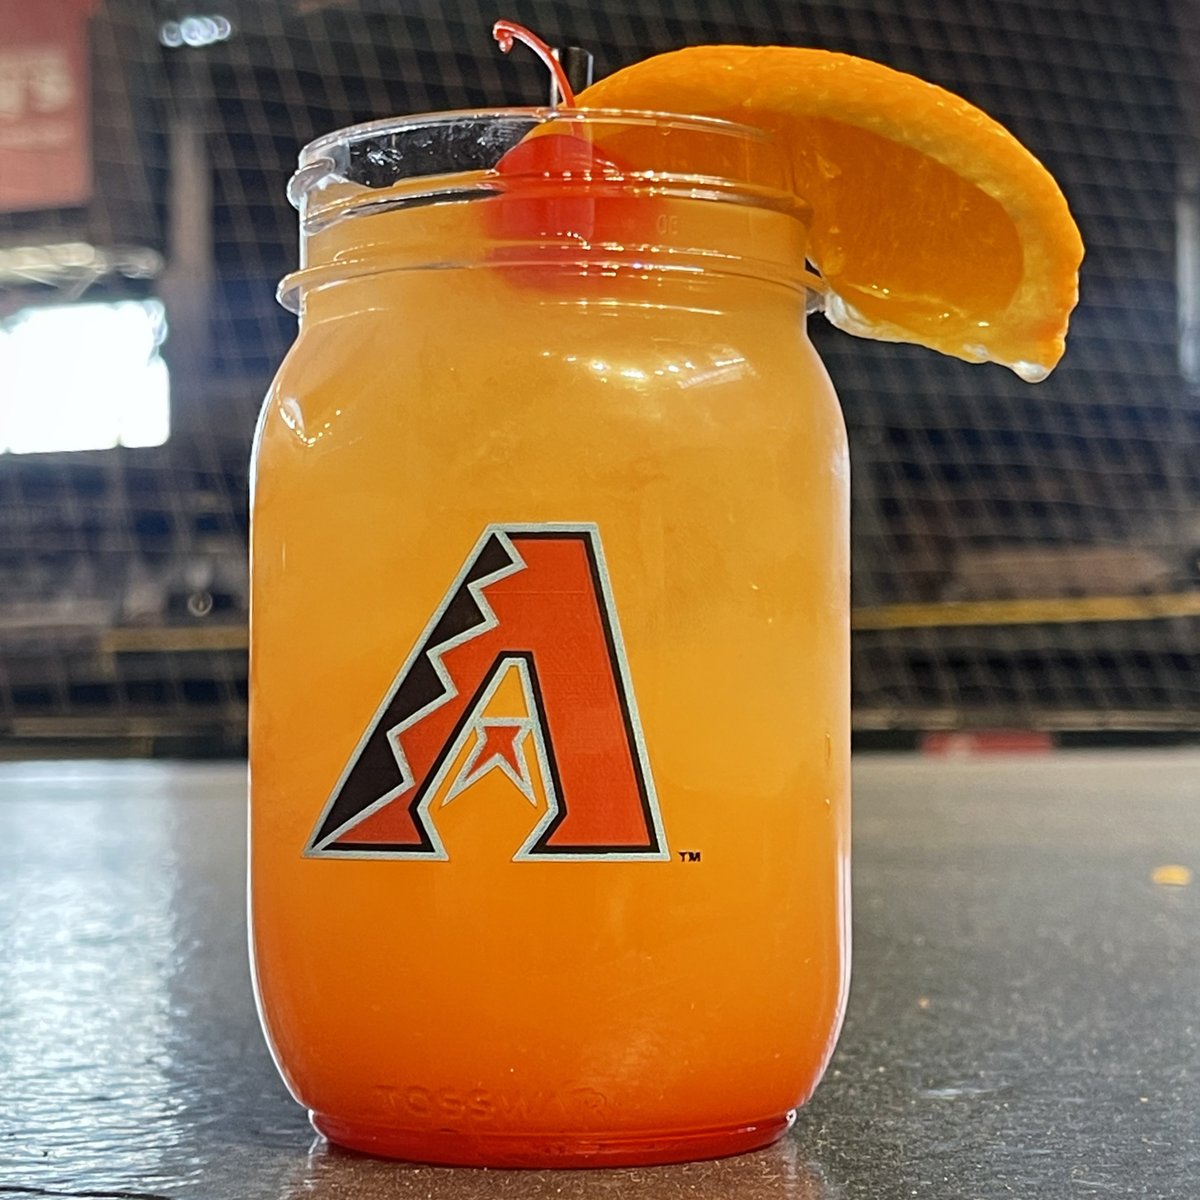 We've also got a drink special! Try the #Dbacks Mule on Sunday - Bourbon, Almond liqueur, pineapple juice, orange juice, lime juice, grenadine and ginger beer, garnished with an orange slice and a maraschino cherry – available at all liquor bars.